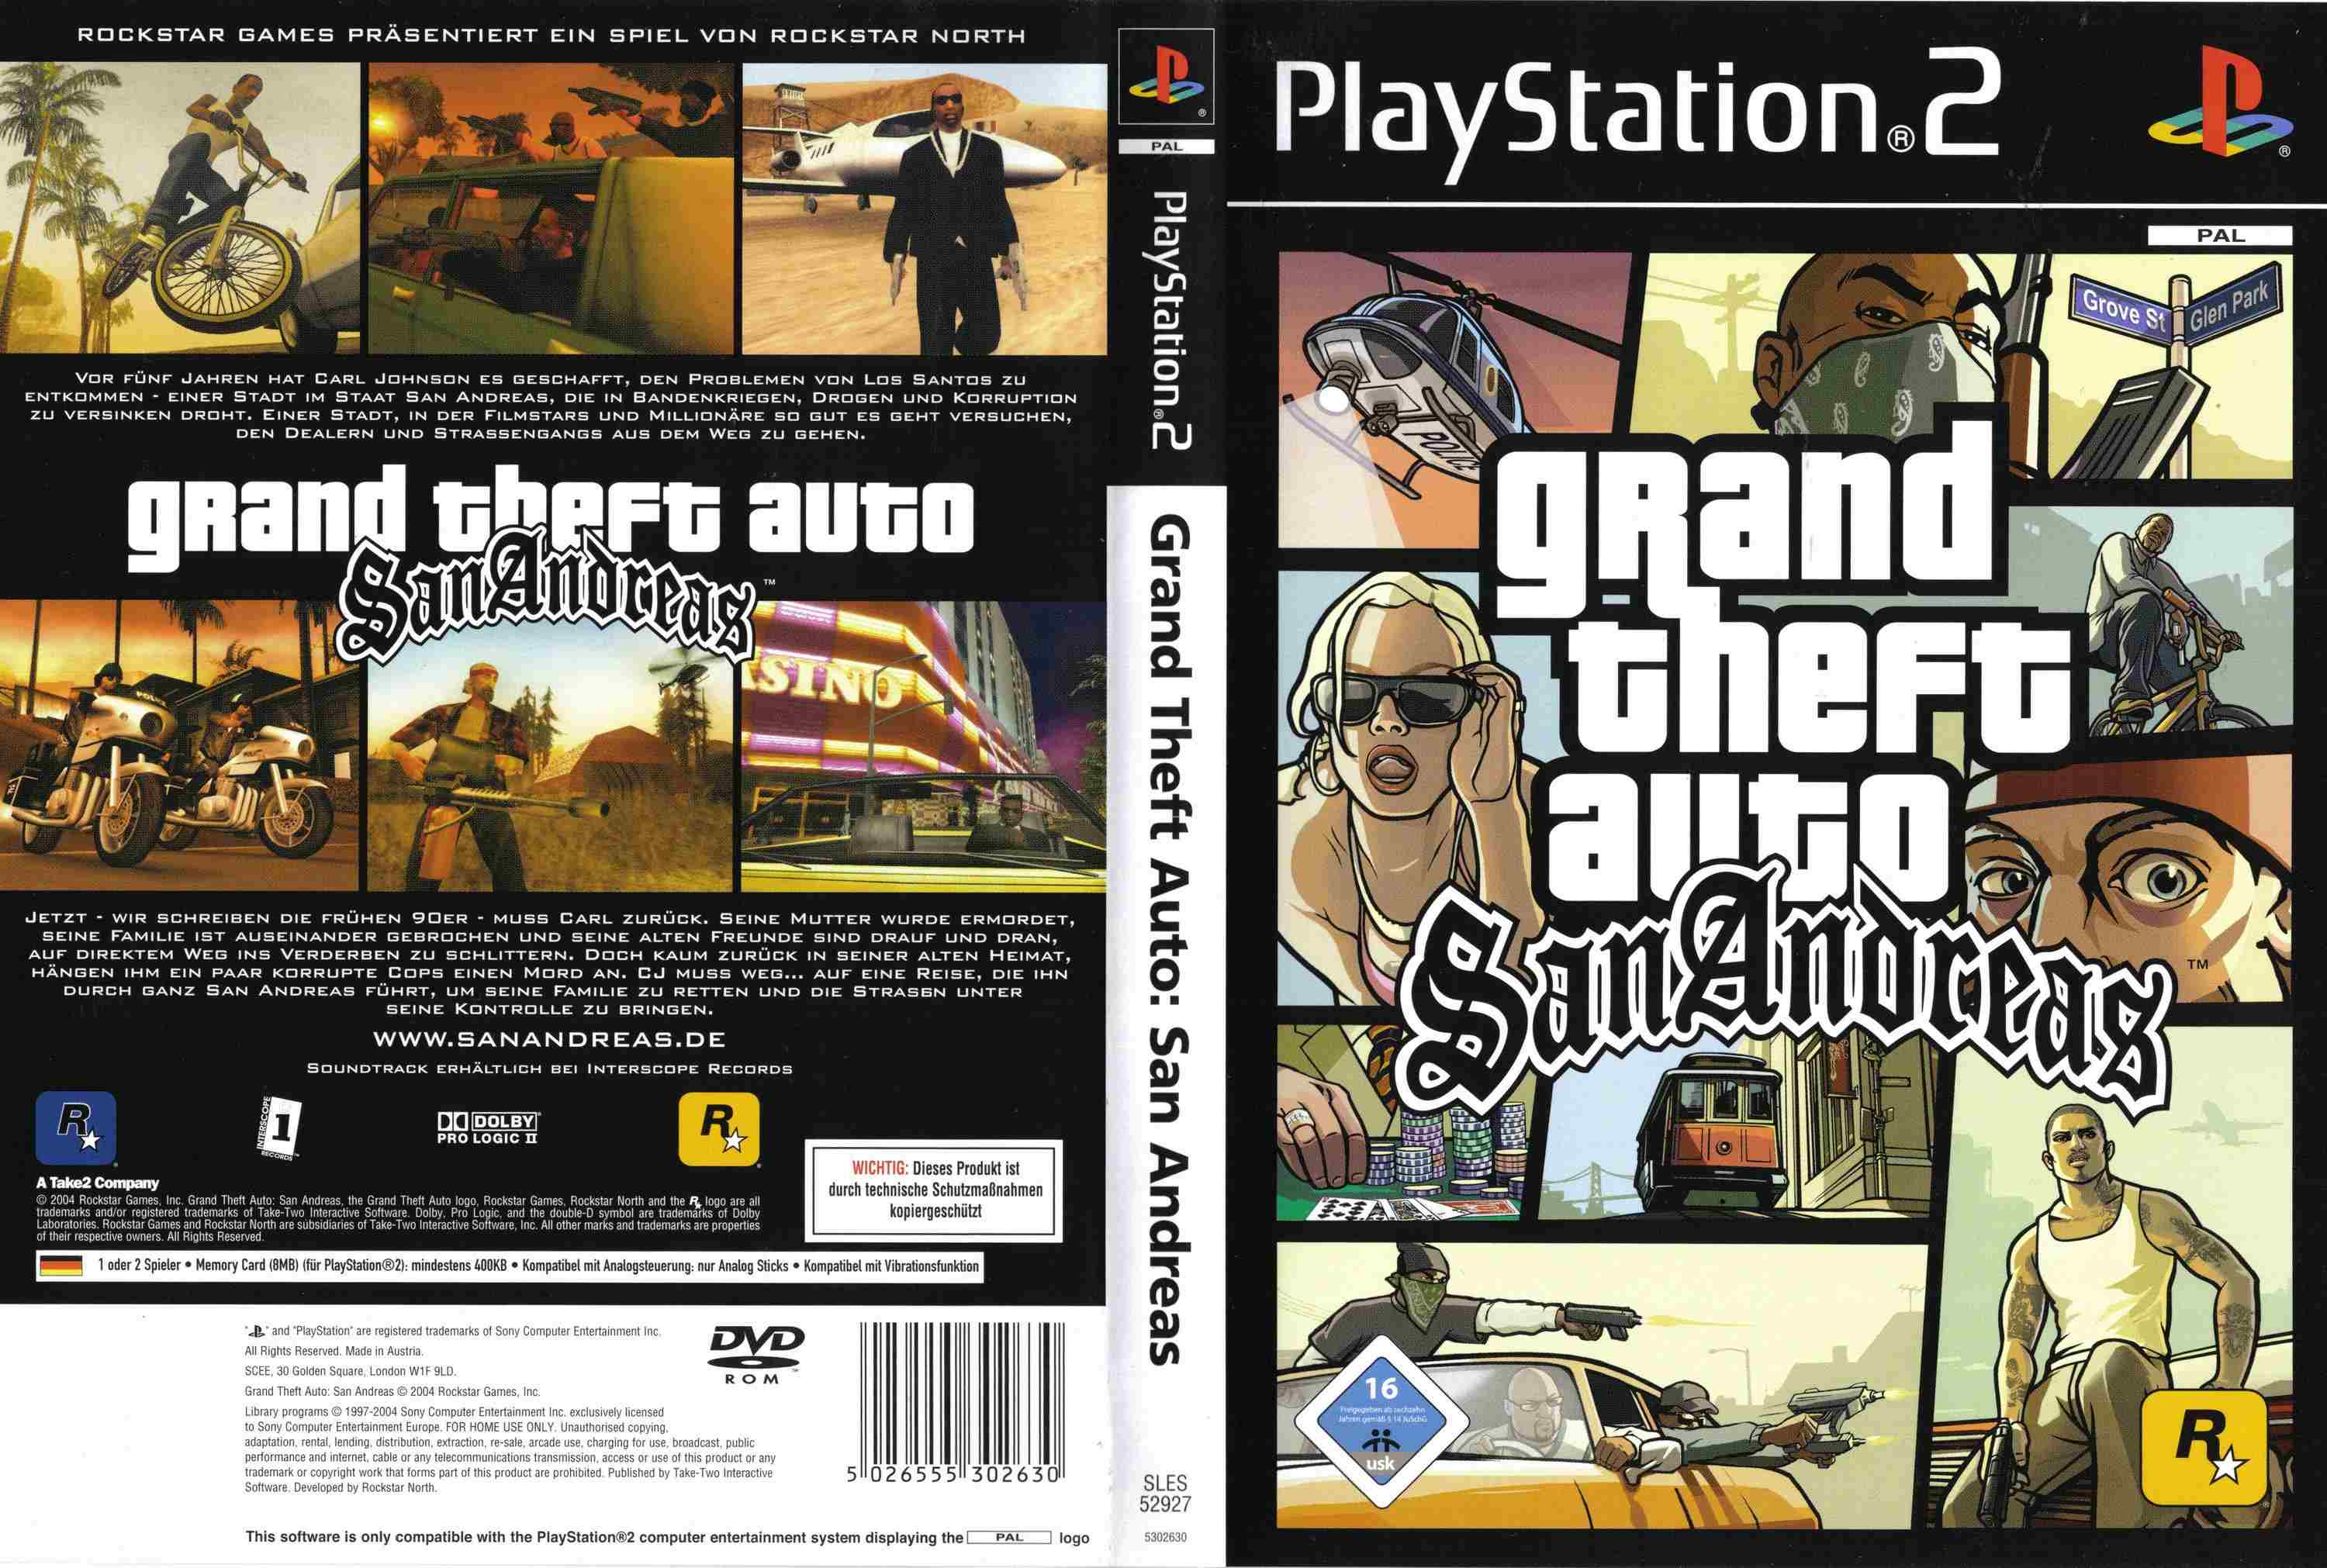 Grand Theft Auto San Andreas dvd cover - DVD Covers & Labels by